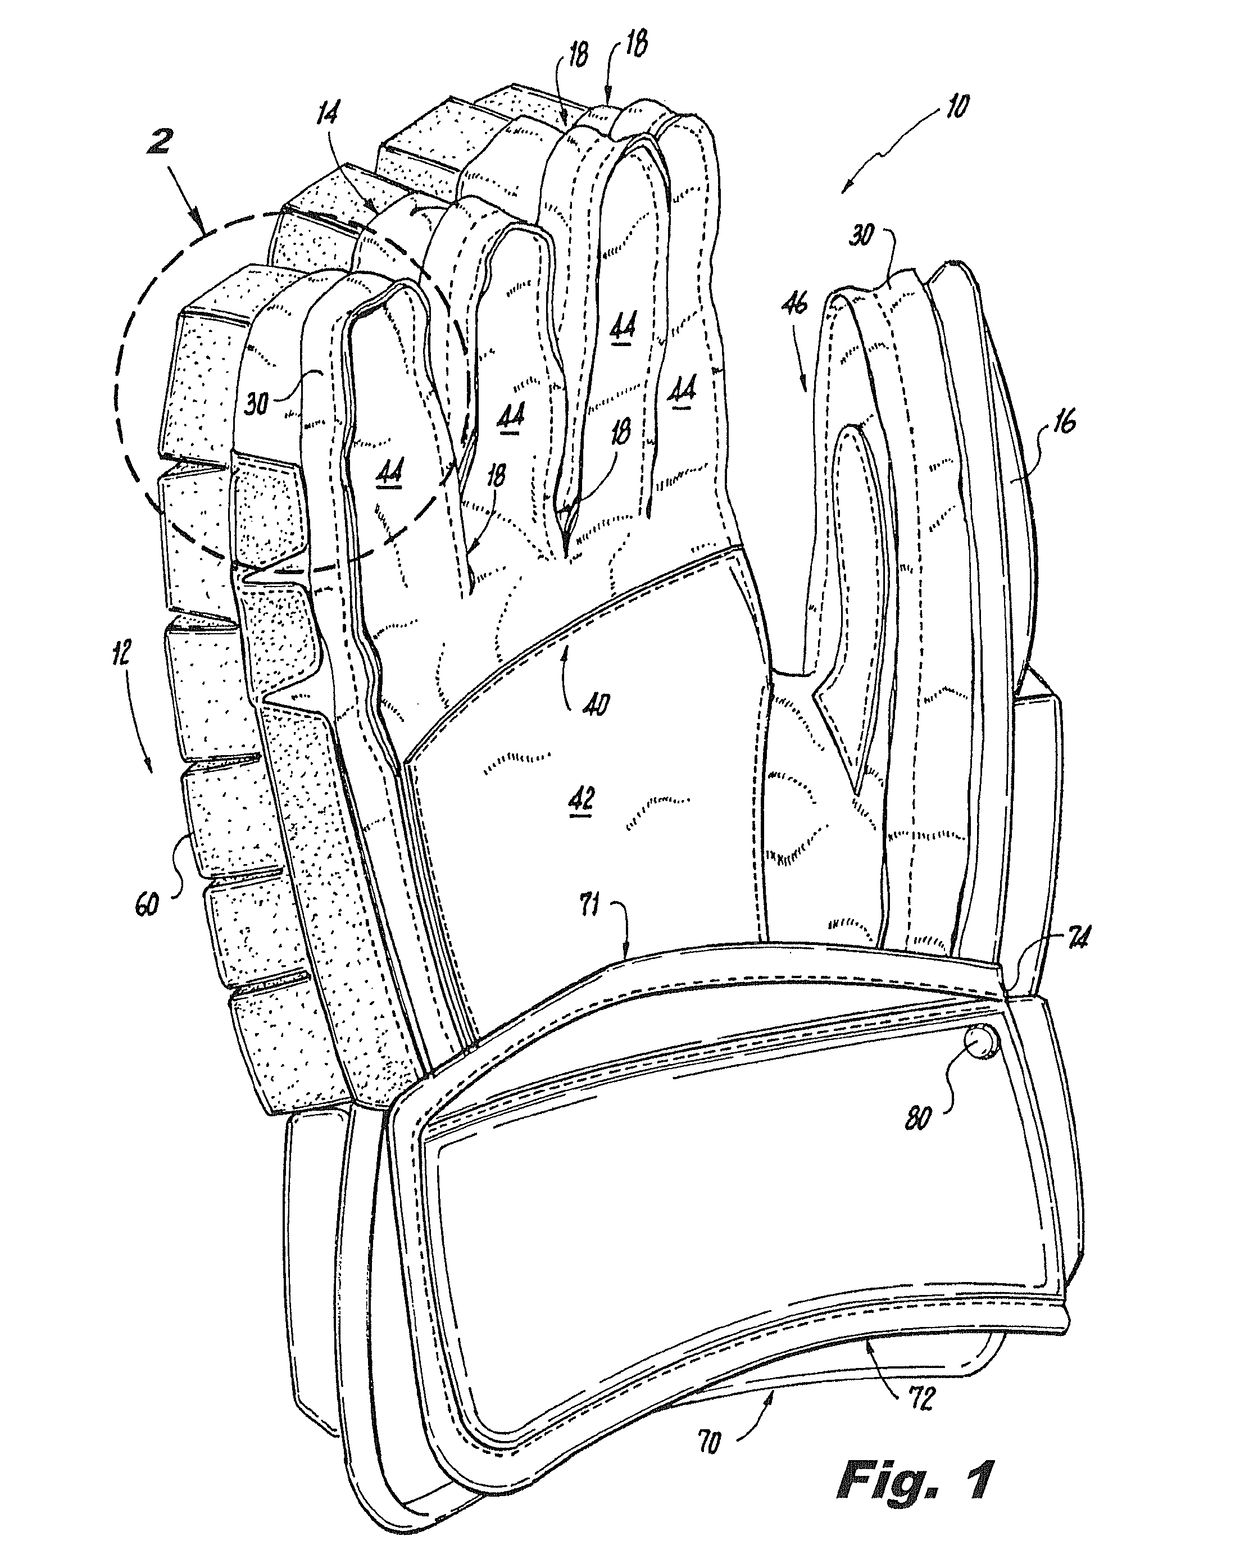 Sports glove with protective interior barriers for fingertips and wrist